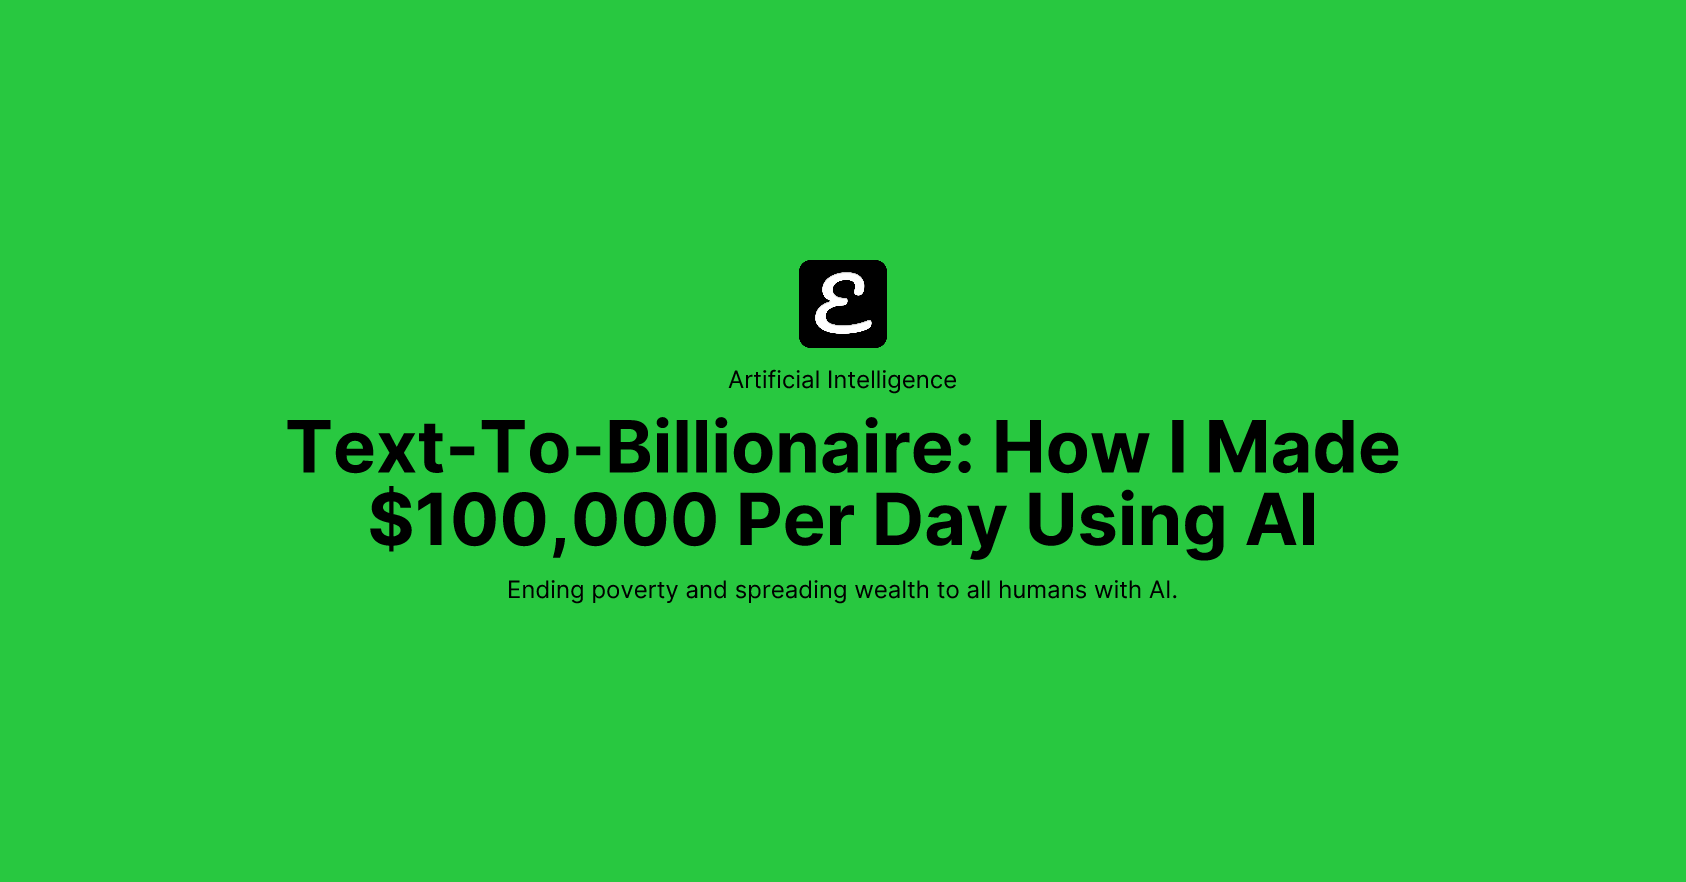 Text-To-Billionaire by Eric David Smith